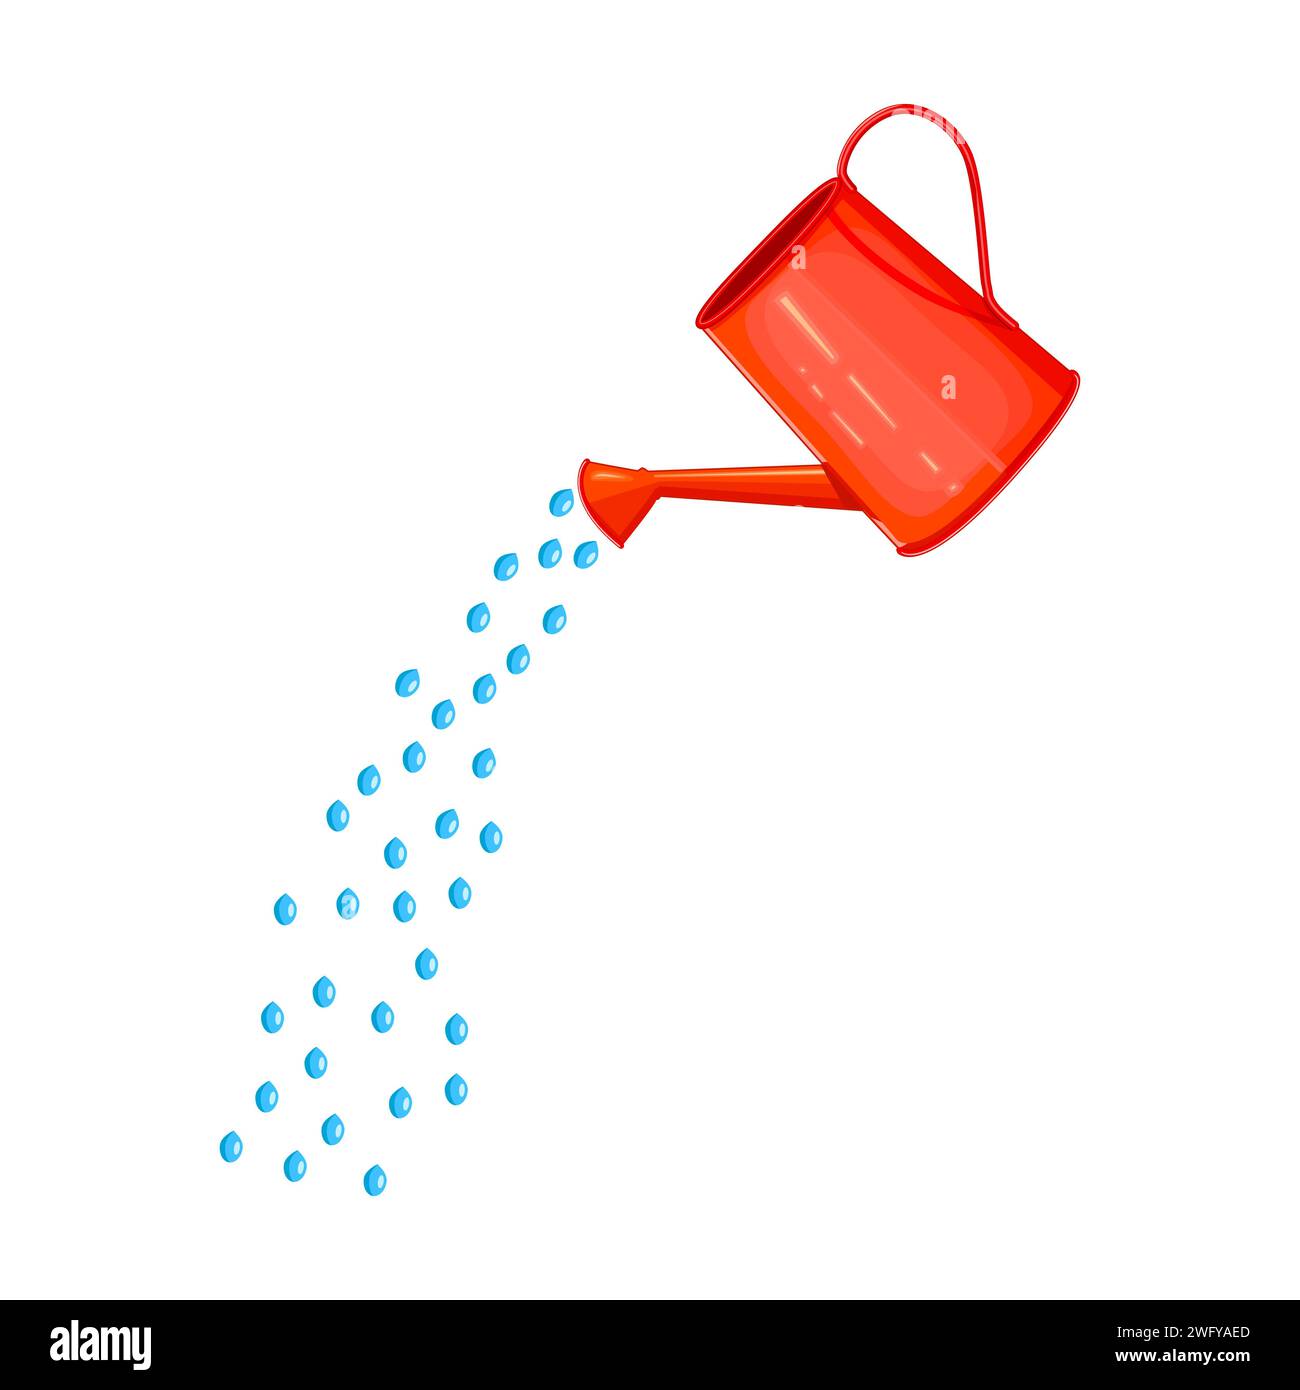 Watering can. Drops of water falling from red watering can. Gardening tool or agricultural implement for horticulture, plant and flowers cultivation. Stock Vector